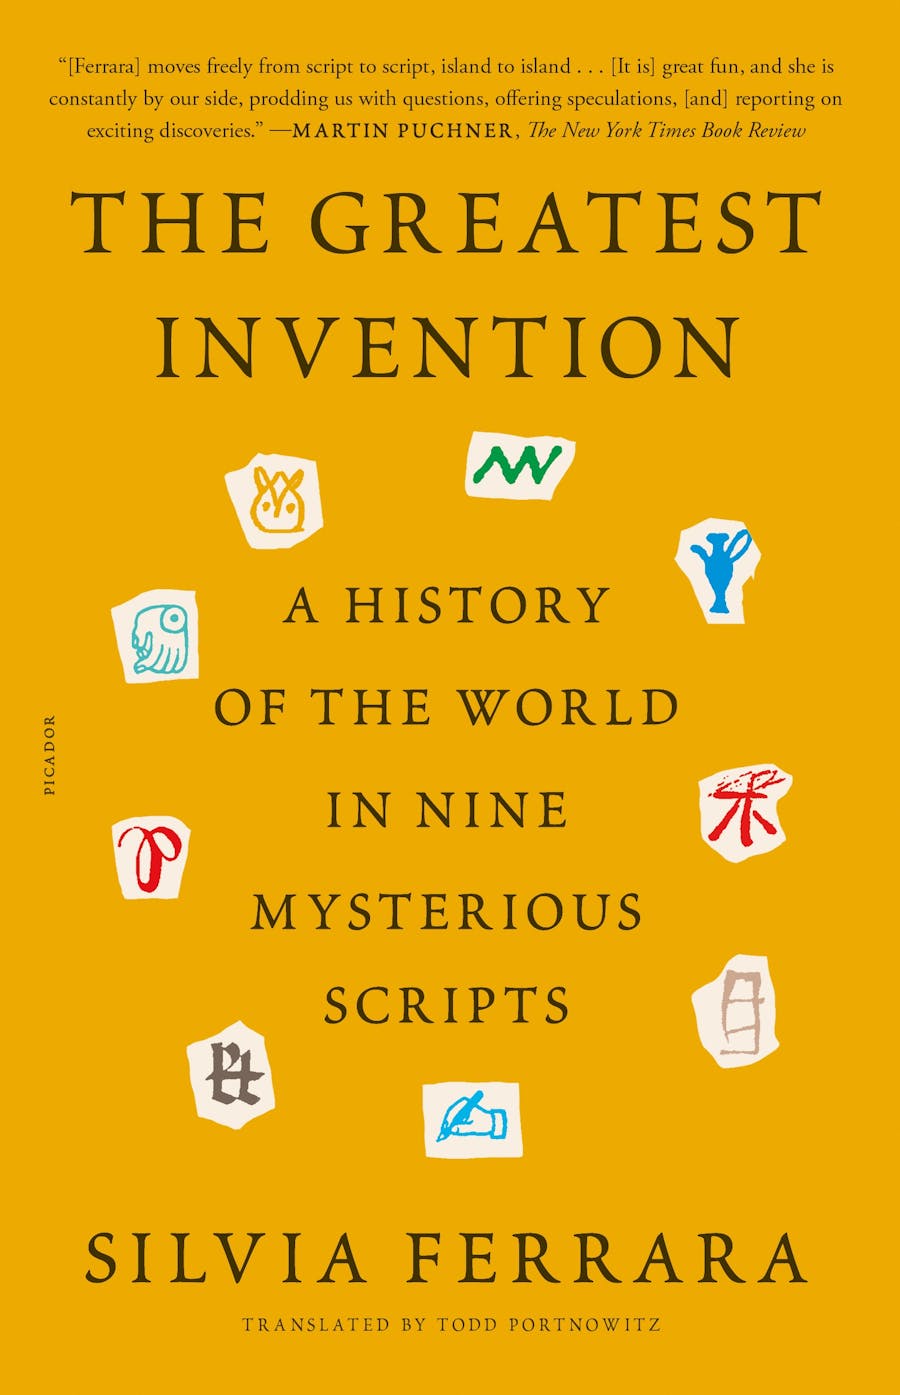 Cover of The Greatest Invention by Silvia Ferrara